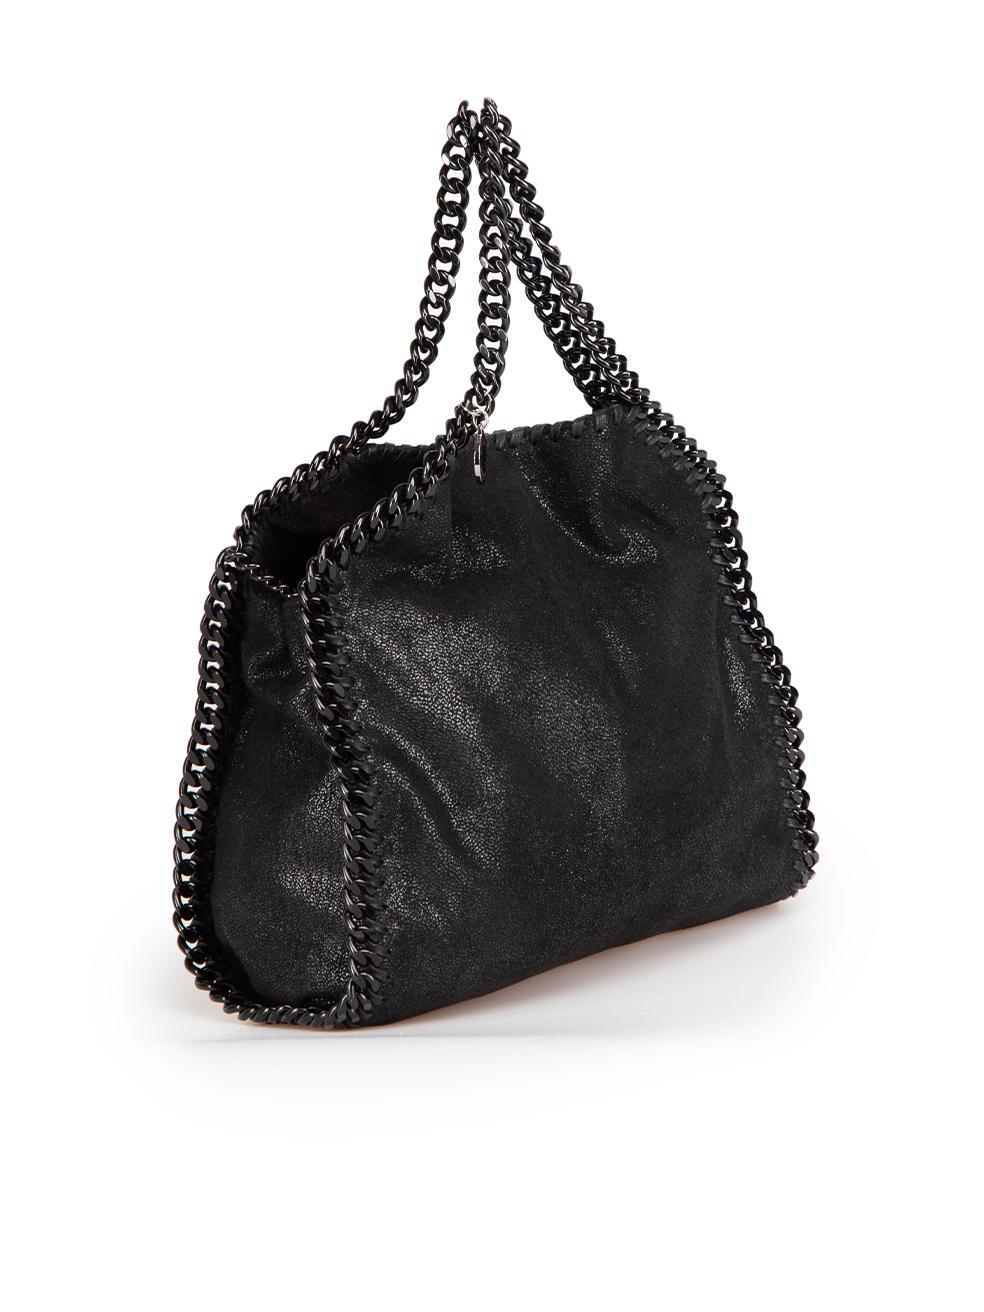 CONDITION is Very good. Hardly any visible wear to bag is evident on this used Stella McCartney designer resale item. This item comes with original dust bag.
 
Details
Falabella
Black
Vegan suede
Mini crossbody bag
Black tone hardware
2x Short chain